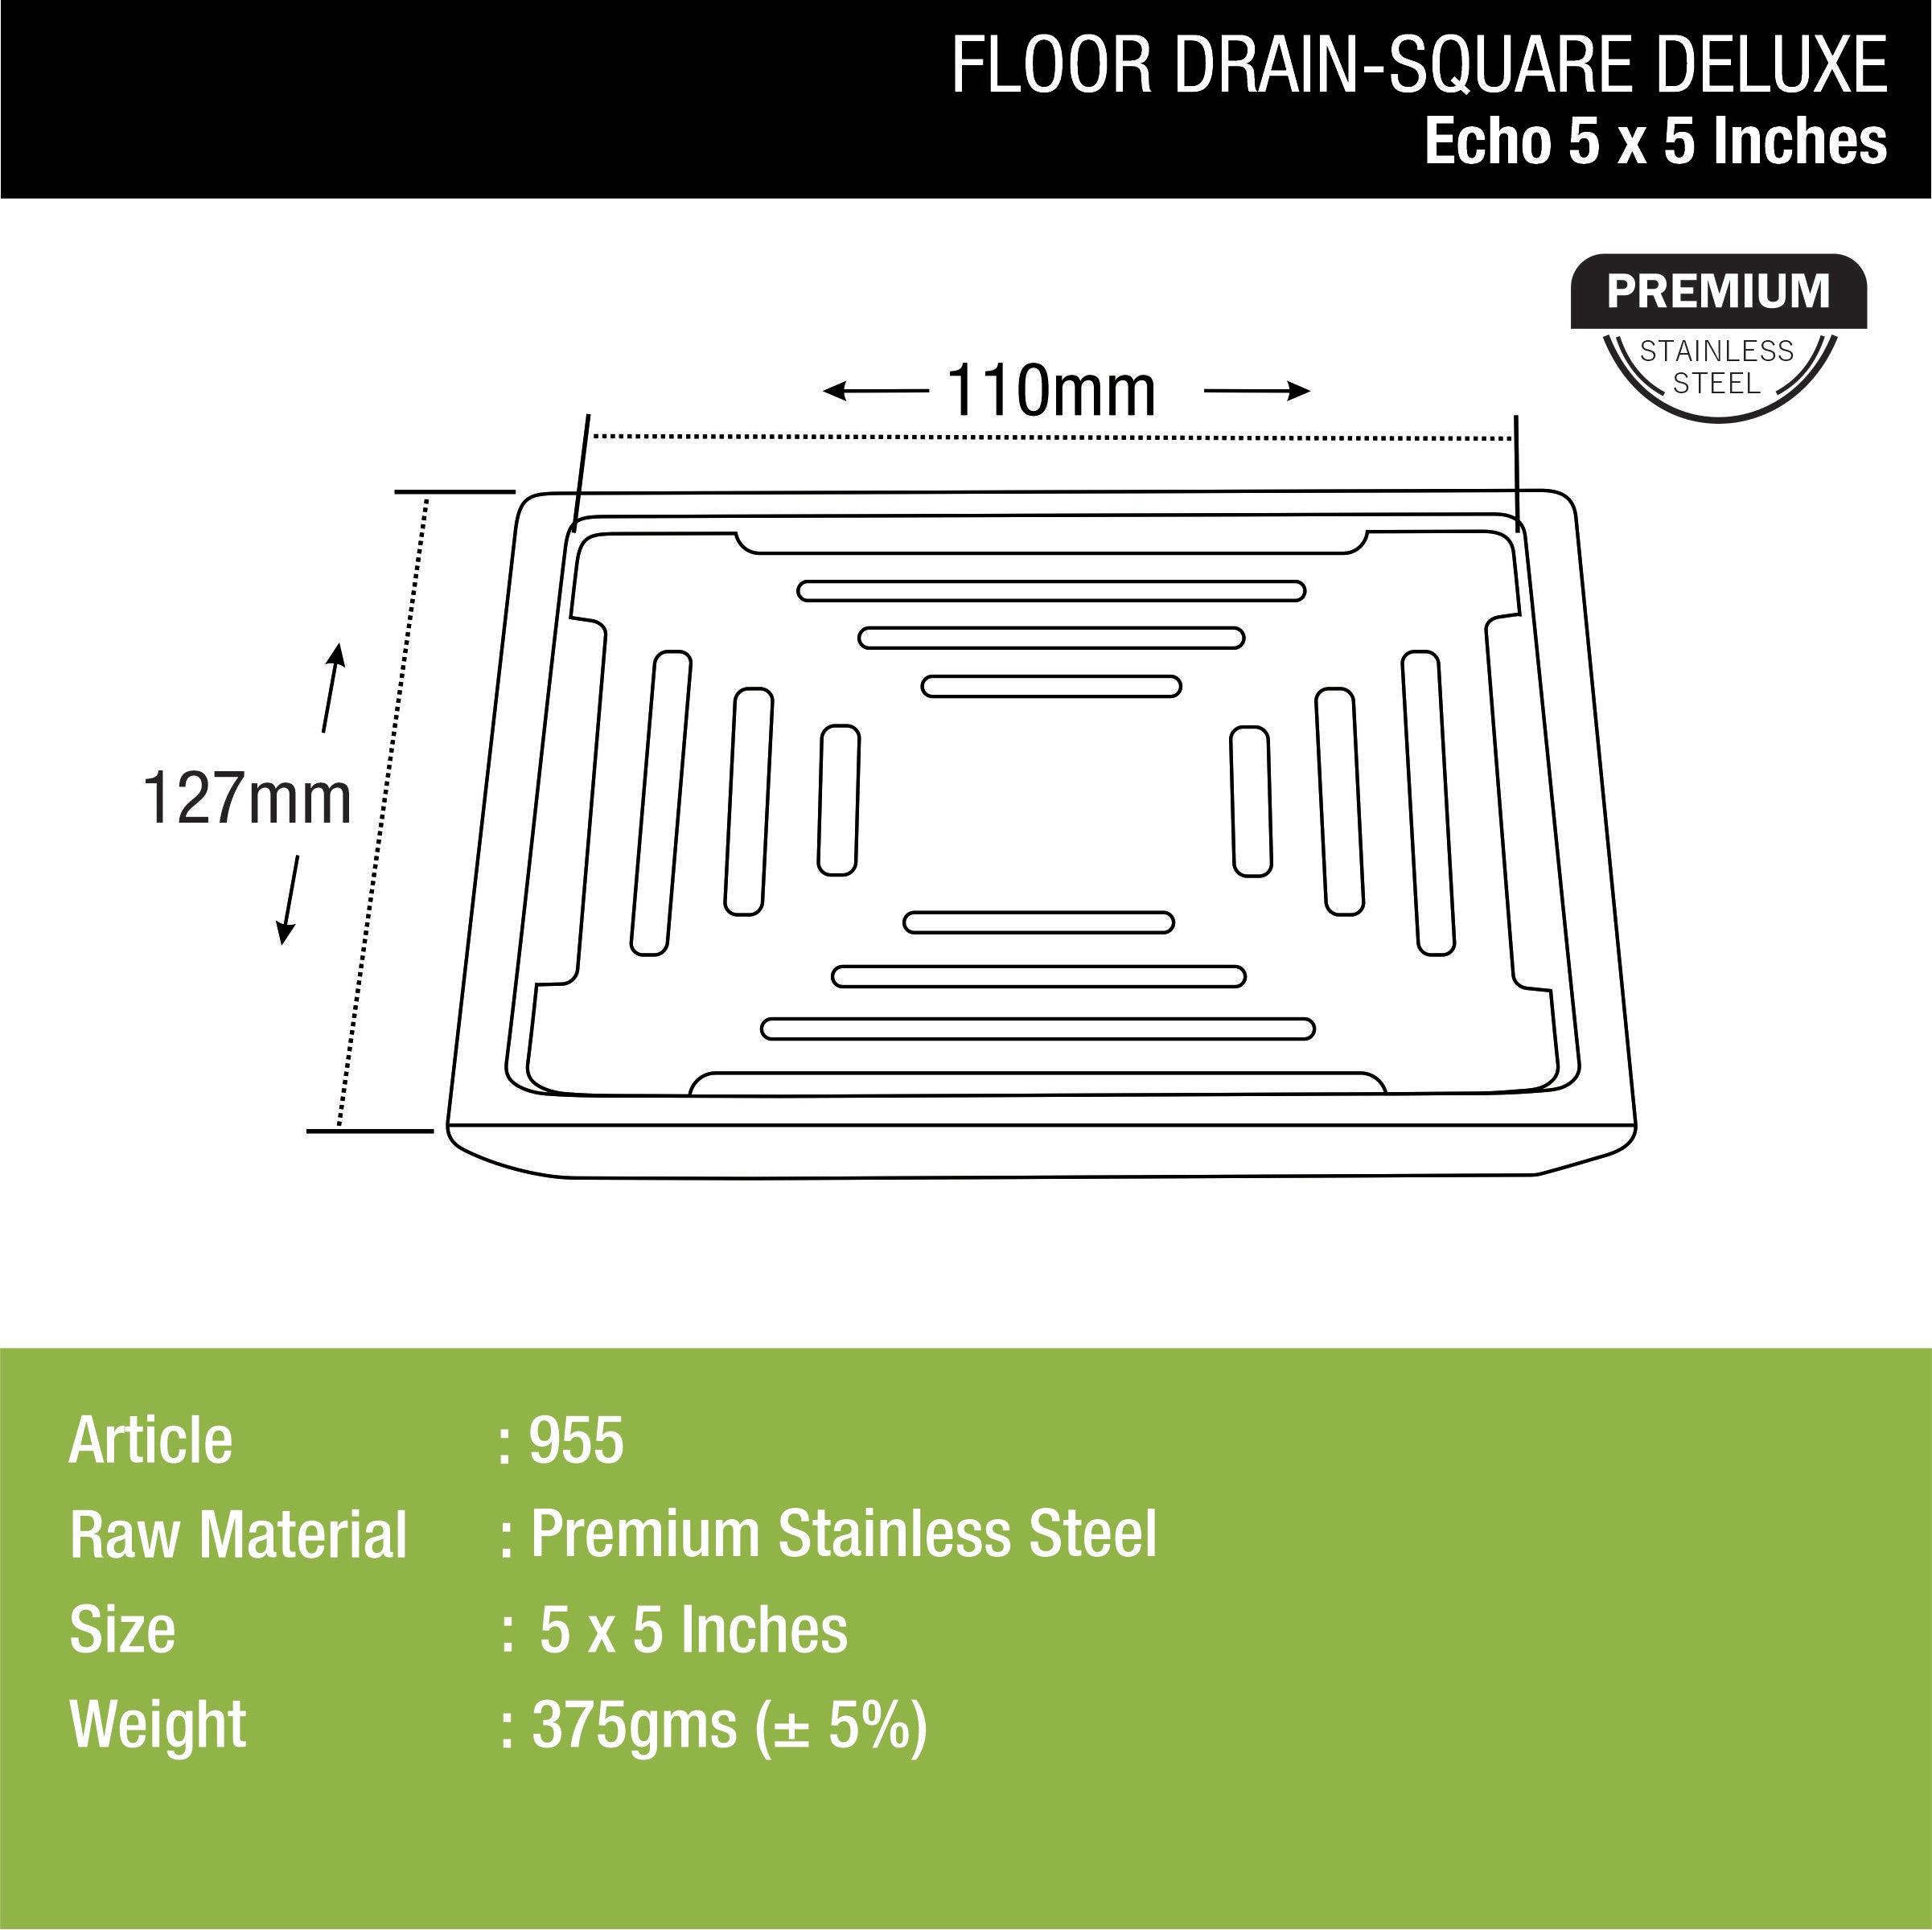 Echo Deluxe Square Floor Drain (5 X 5 Inches) dimensions and sizes